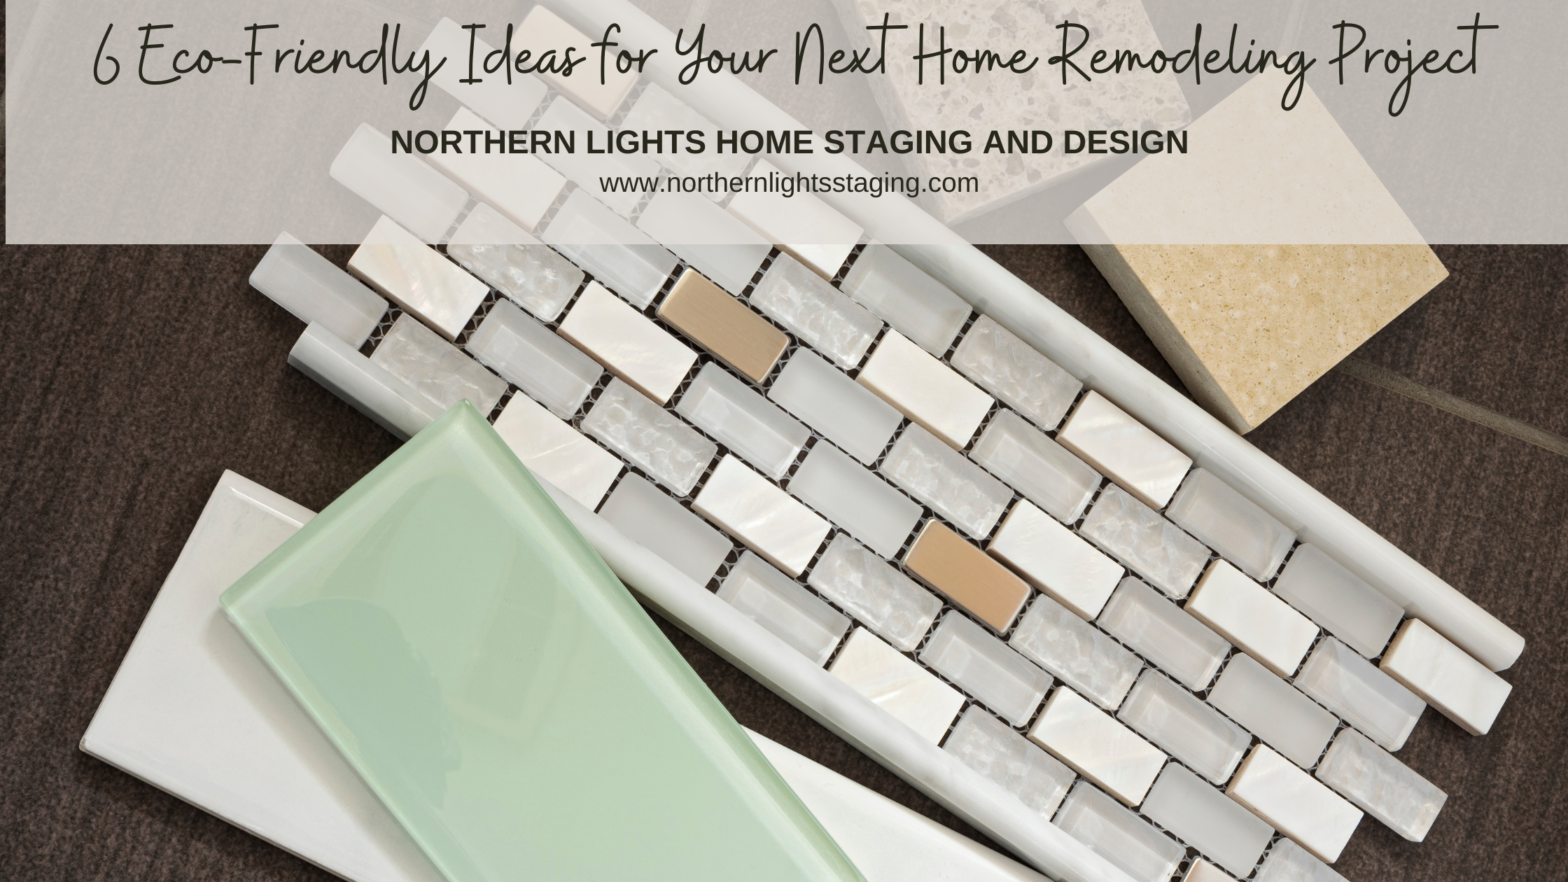 6 Eco-Friendly Ideas for Your Next Home Remodeling Project. Written by Ray Flynn for Northern Lights Home Staging and Design.